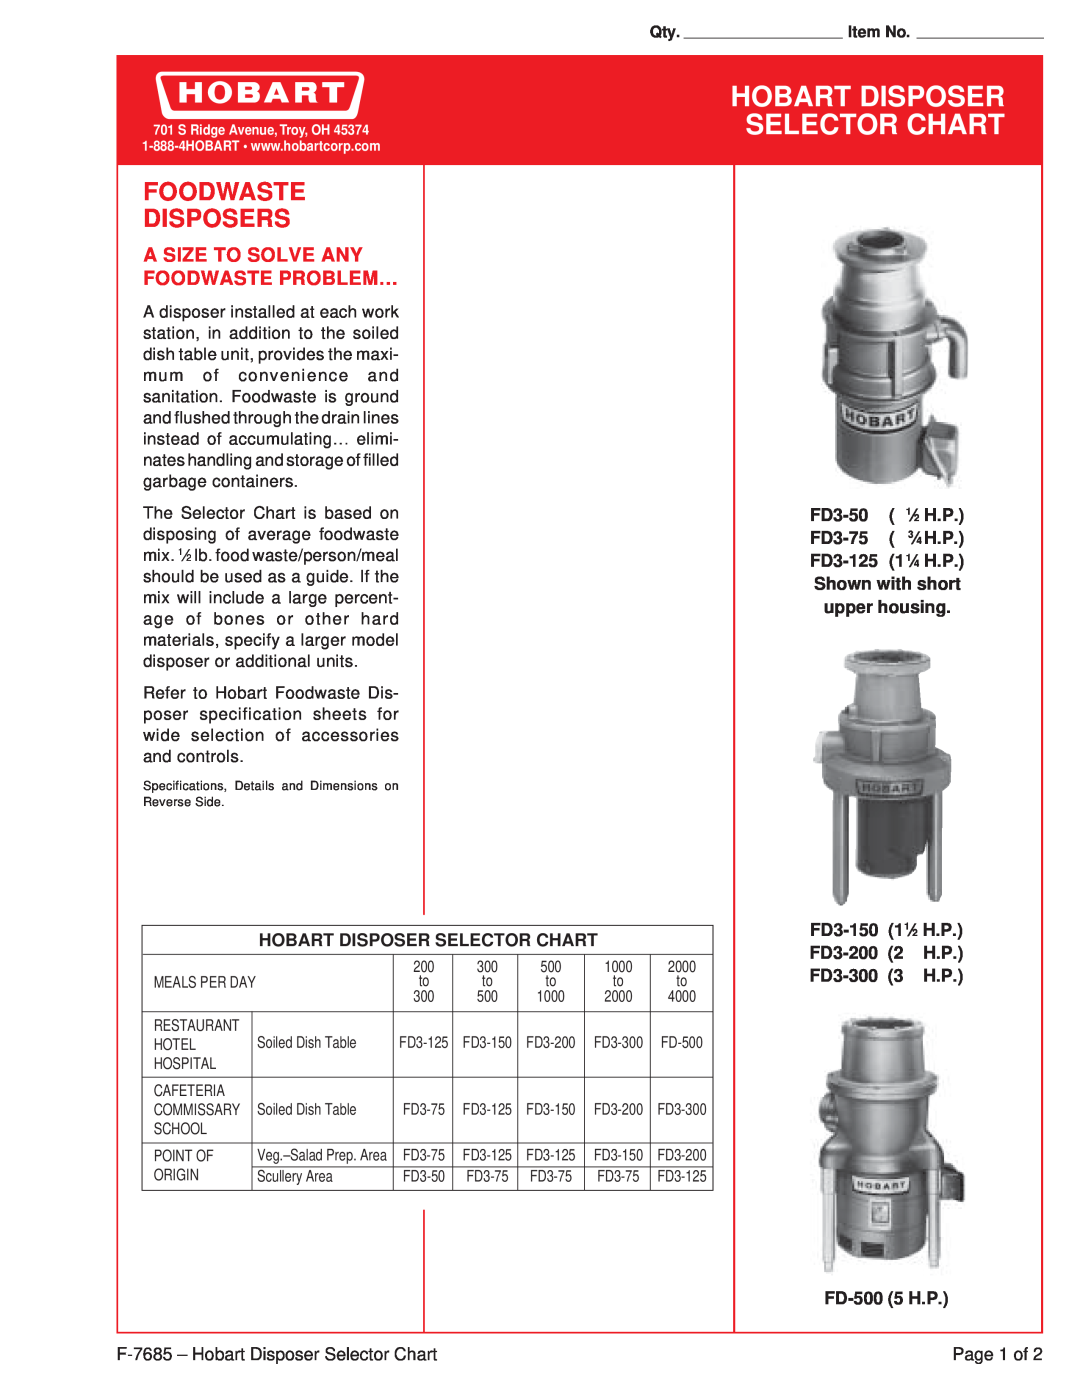 Hobart FD3-50 specifications Hobart Disposer Selector Chart, Foodwaste Disposers, A Size To Solve Any Foodwaste Problem… 